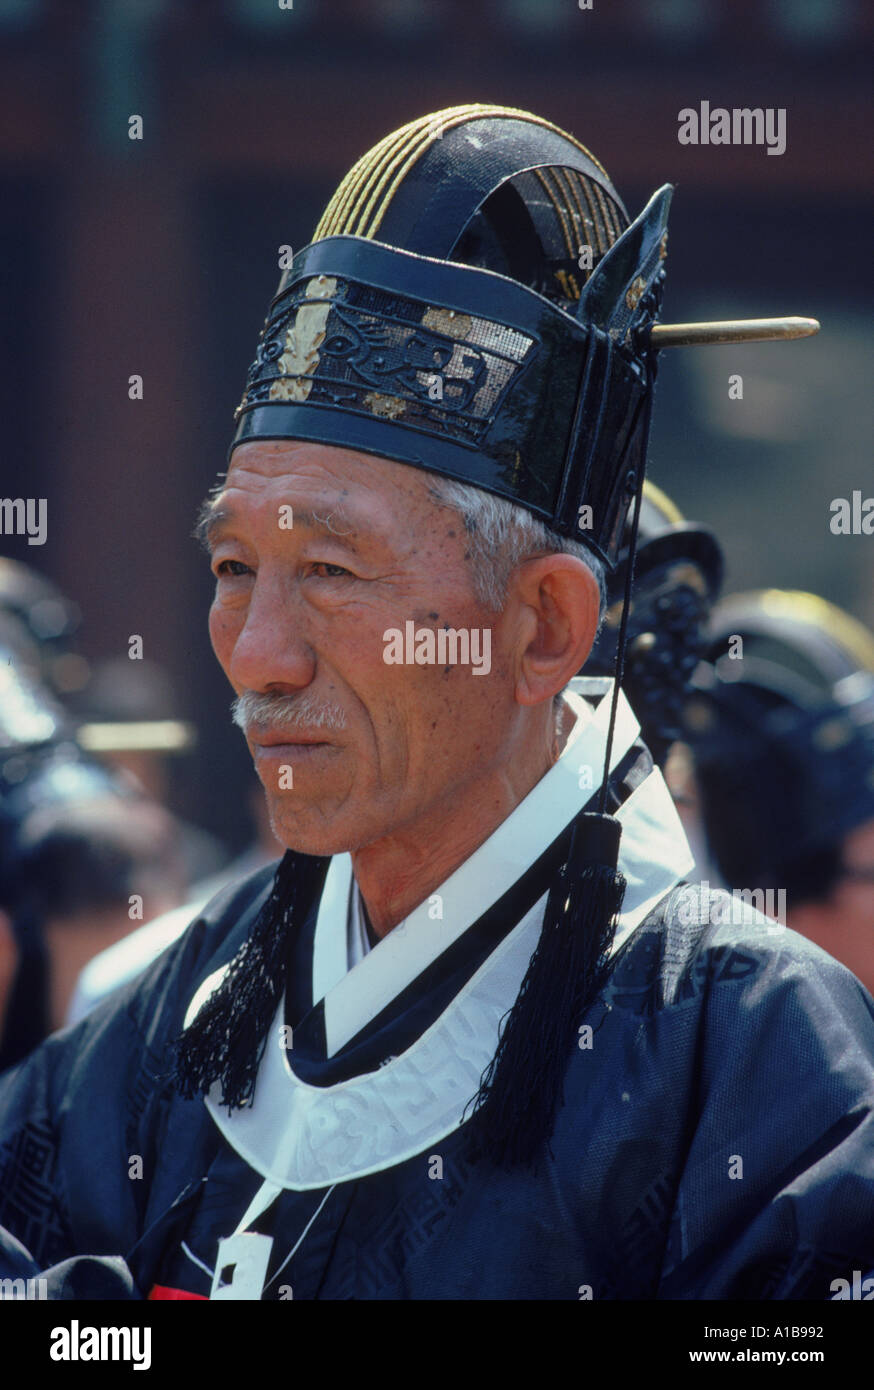 Portrait of an old man in traditional dress who is a Confucian scholar during the Sokchon Ceremony in South Korea Asia A Evrard Stock Photo